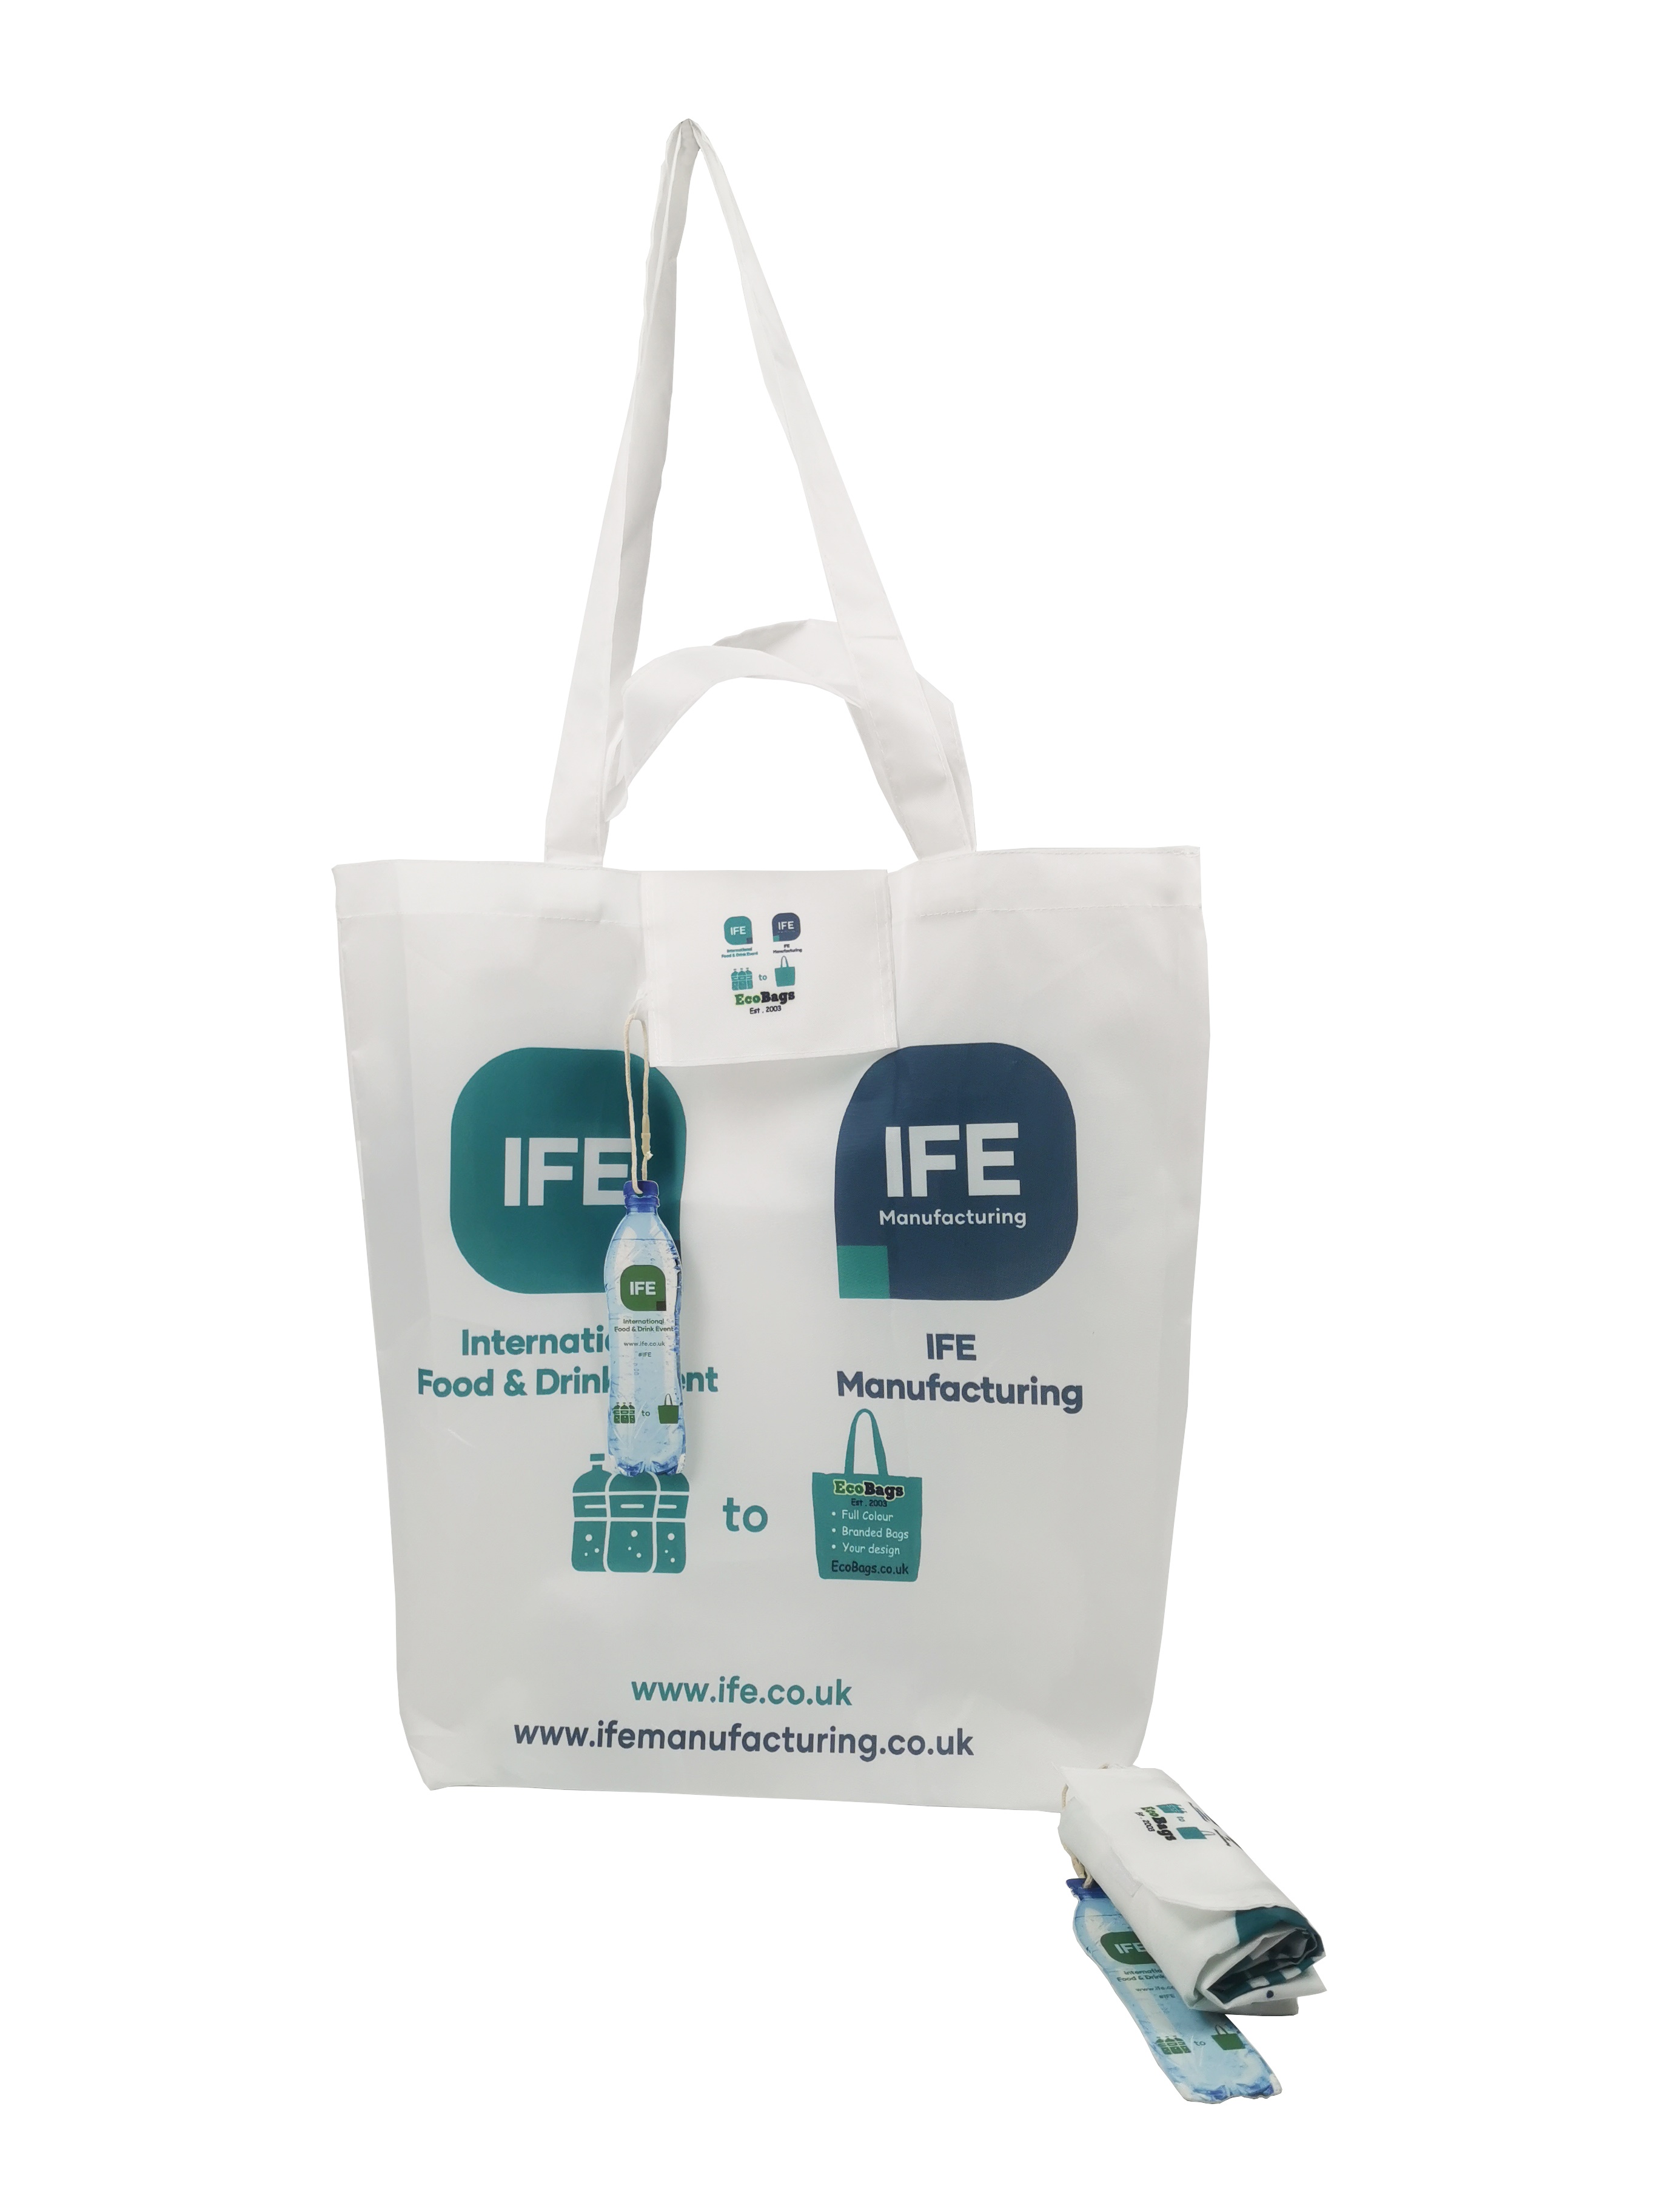 Event Bags made from Recycled Plastic Bottles